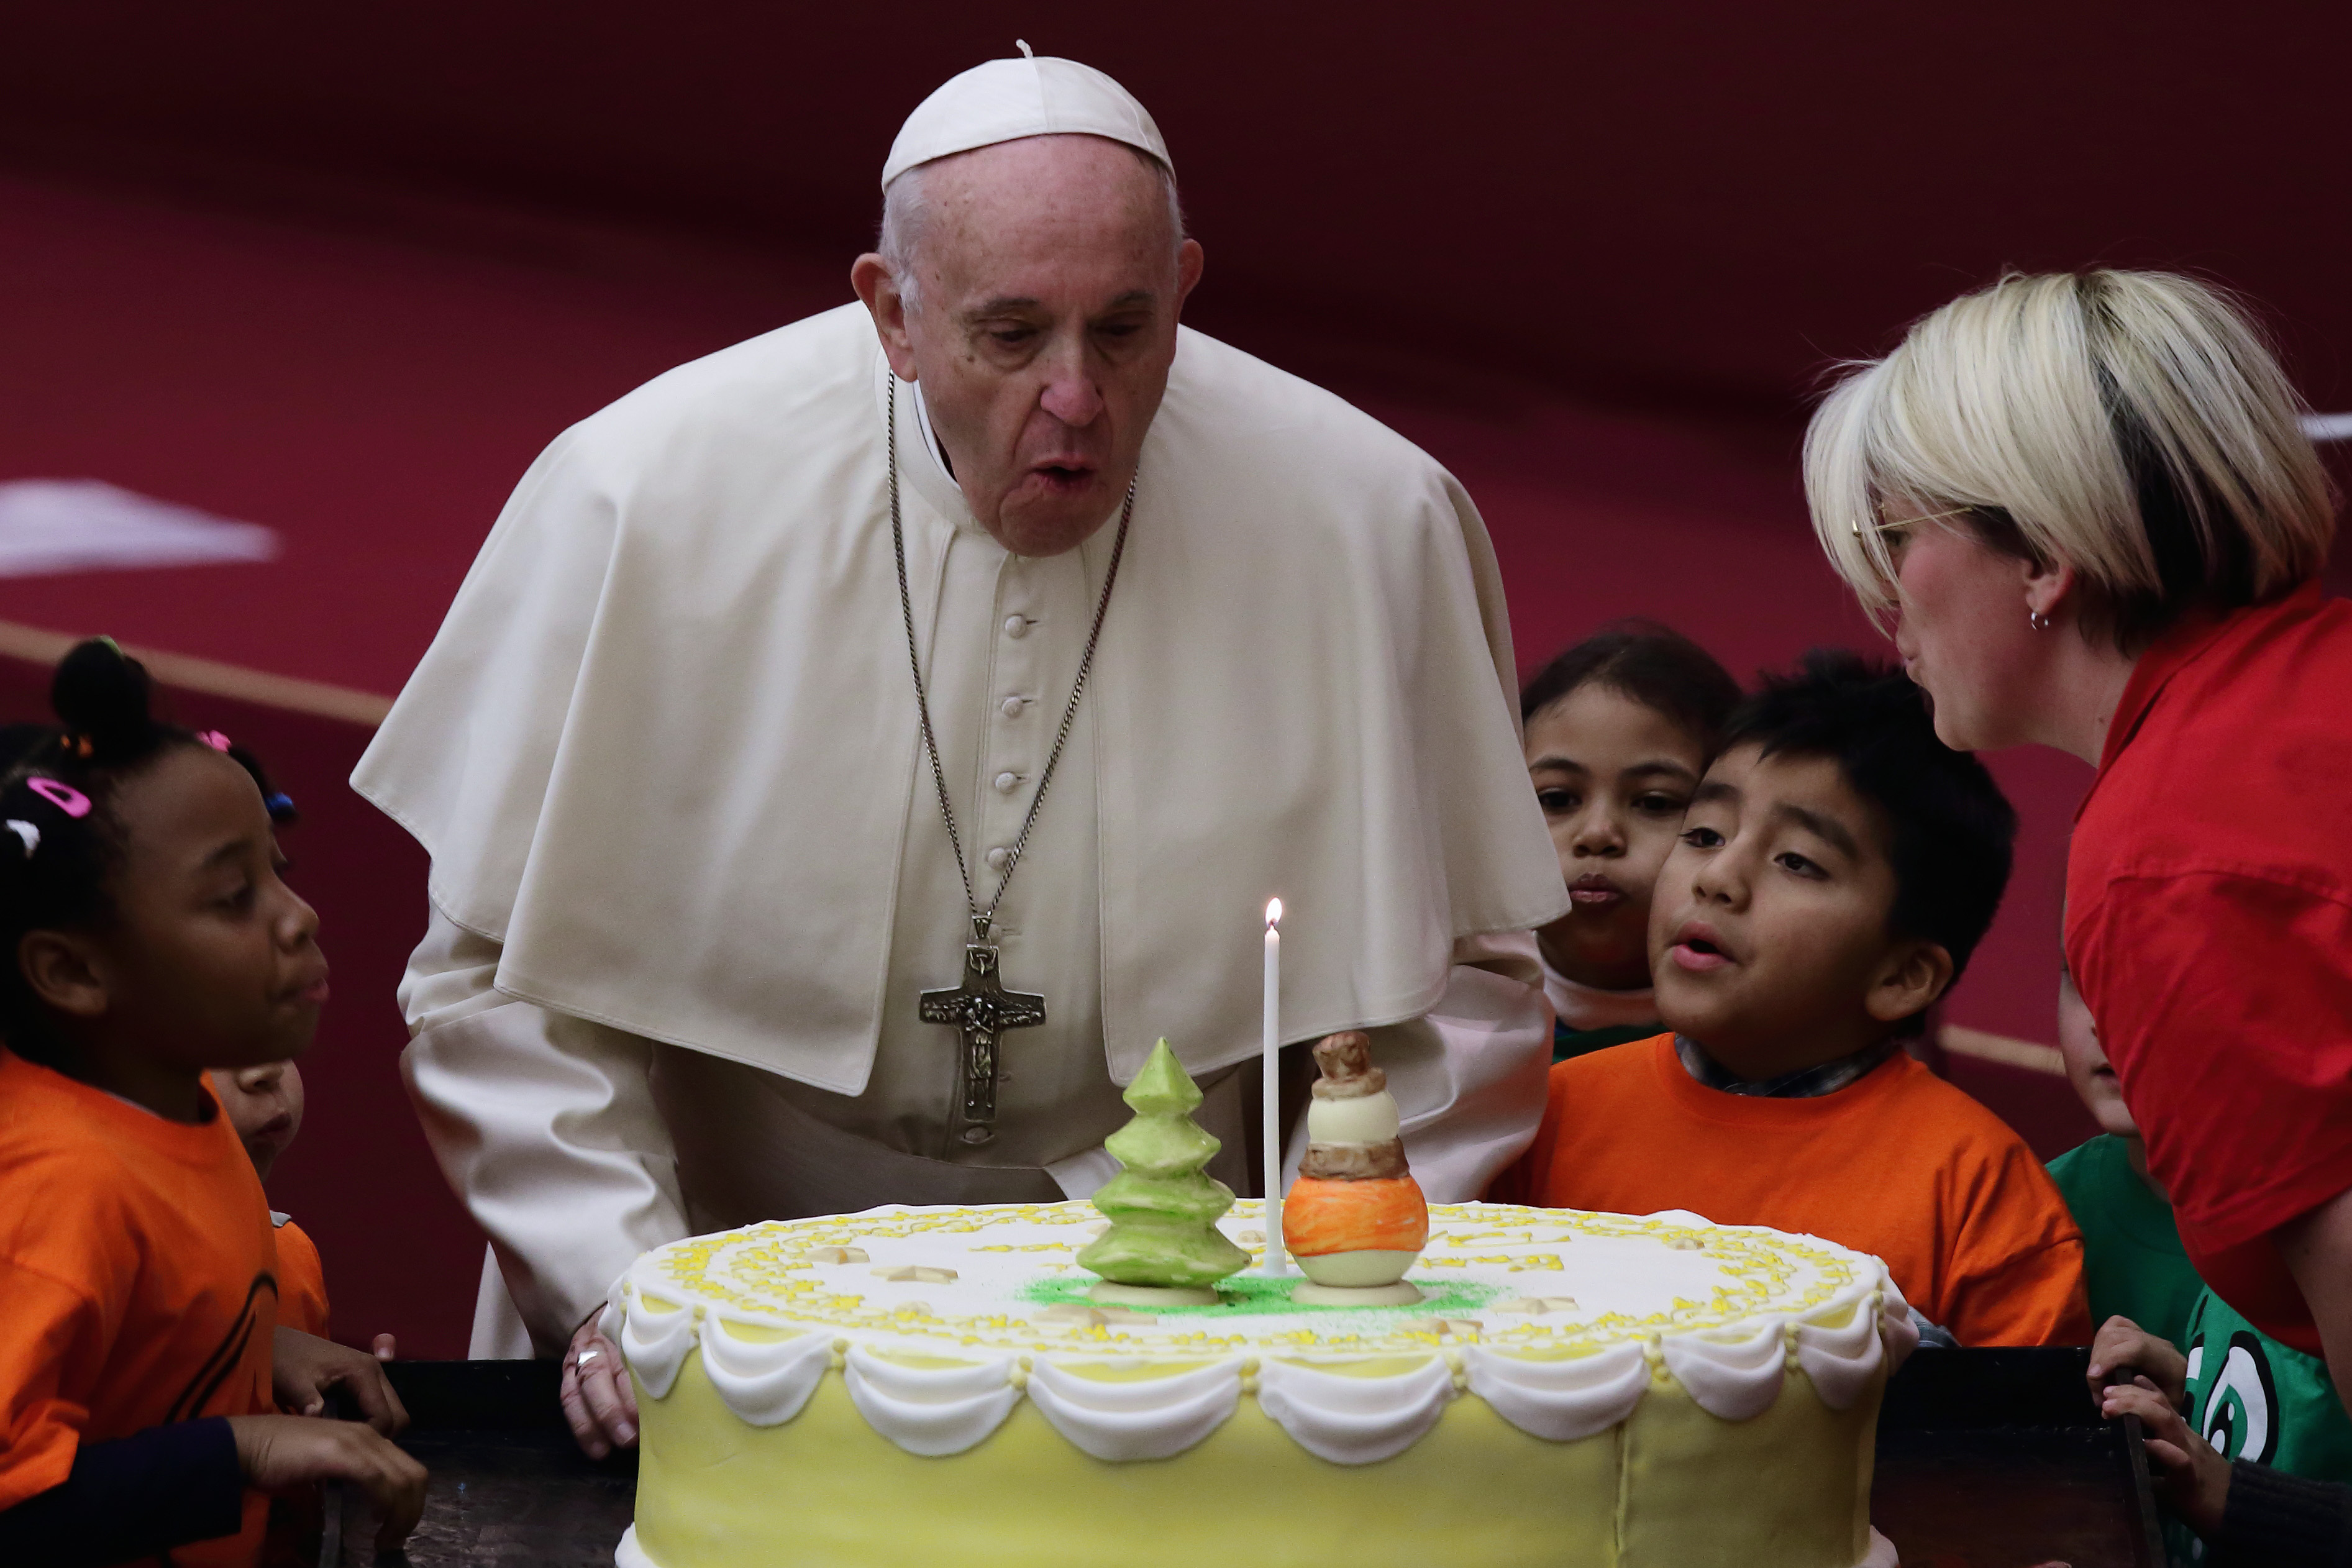 Pope celebrates his birthday with party for sick children